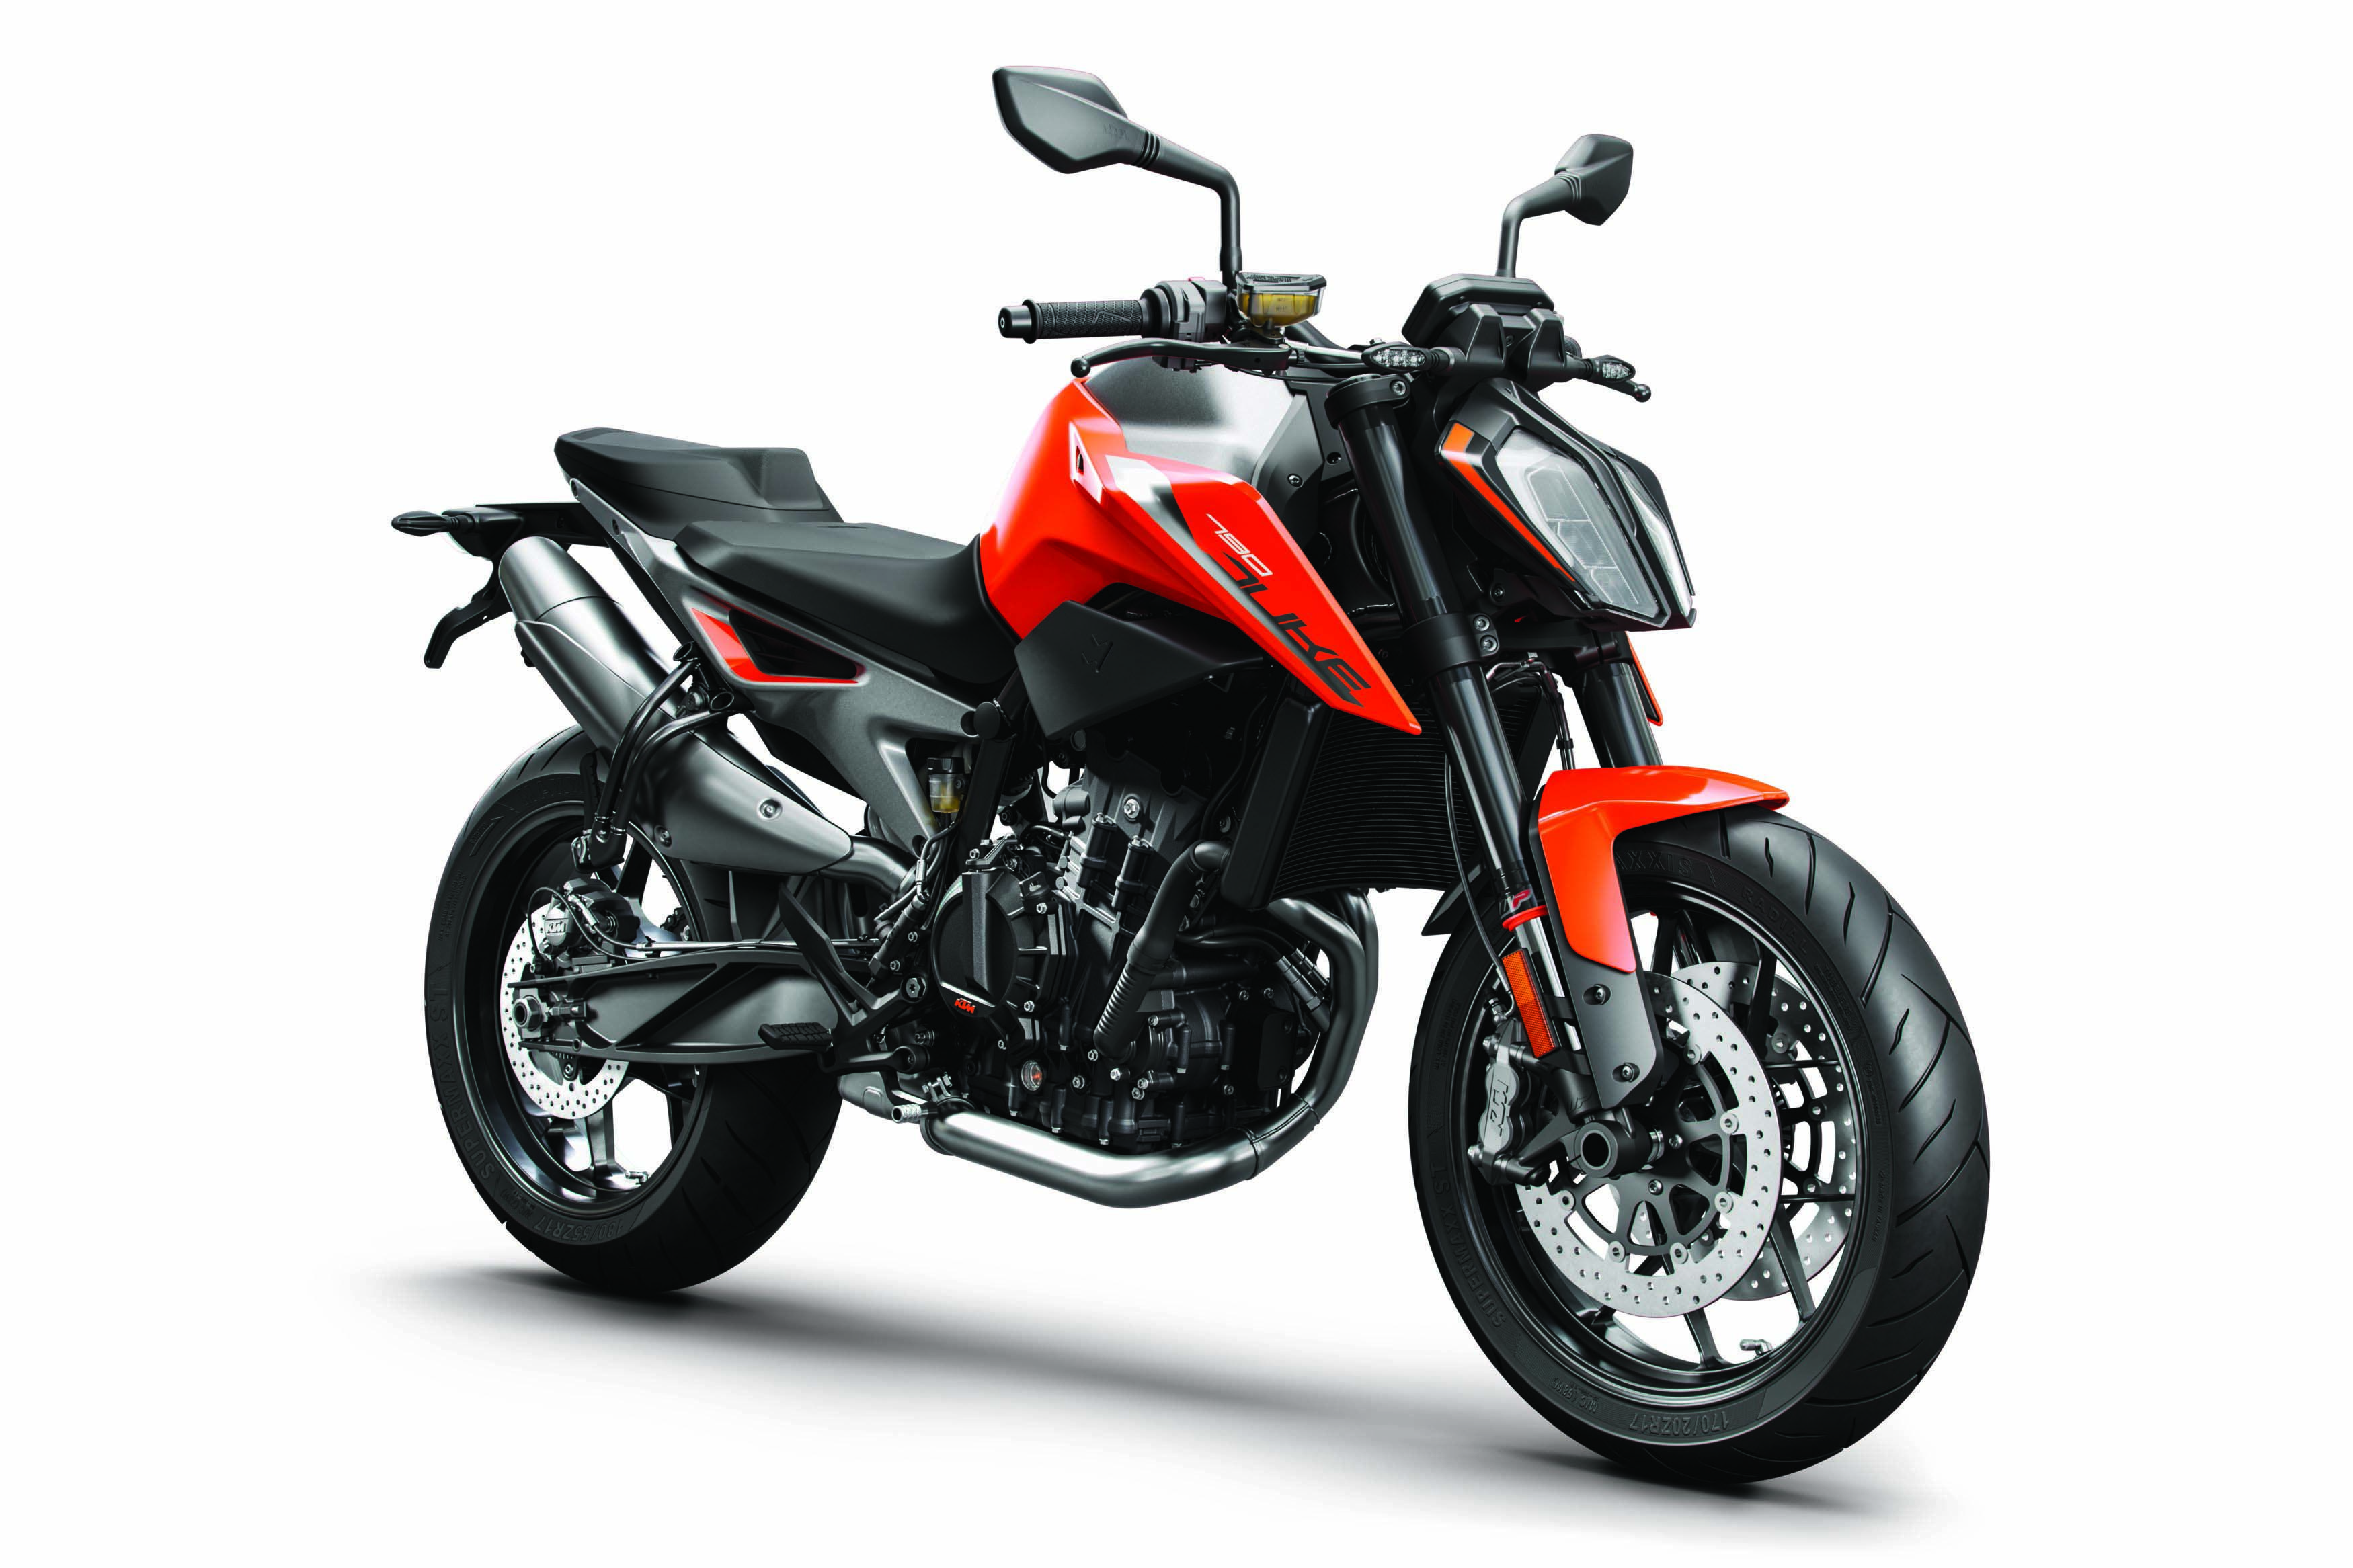 <p>A year ago Team <a href="http://overdrive.in/news-cars-auto/breaking-2018-ktm-790-duke-to-be-launched-in-india-post-diwali-2018-pre-bookings-already-open/">OVERDRIVE reported that the KTM 790 Duke will be launched in India&nbsp;</a>&nbsp;and&nbsp;finally the day has come.</p>